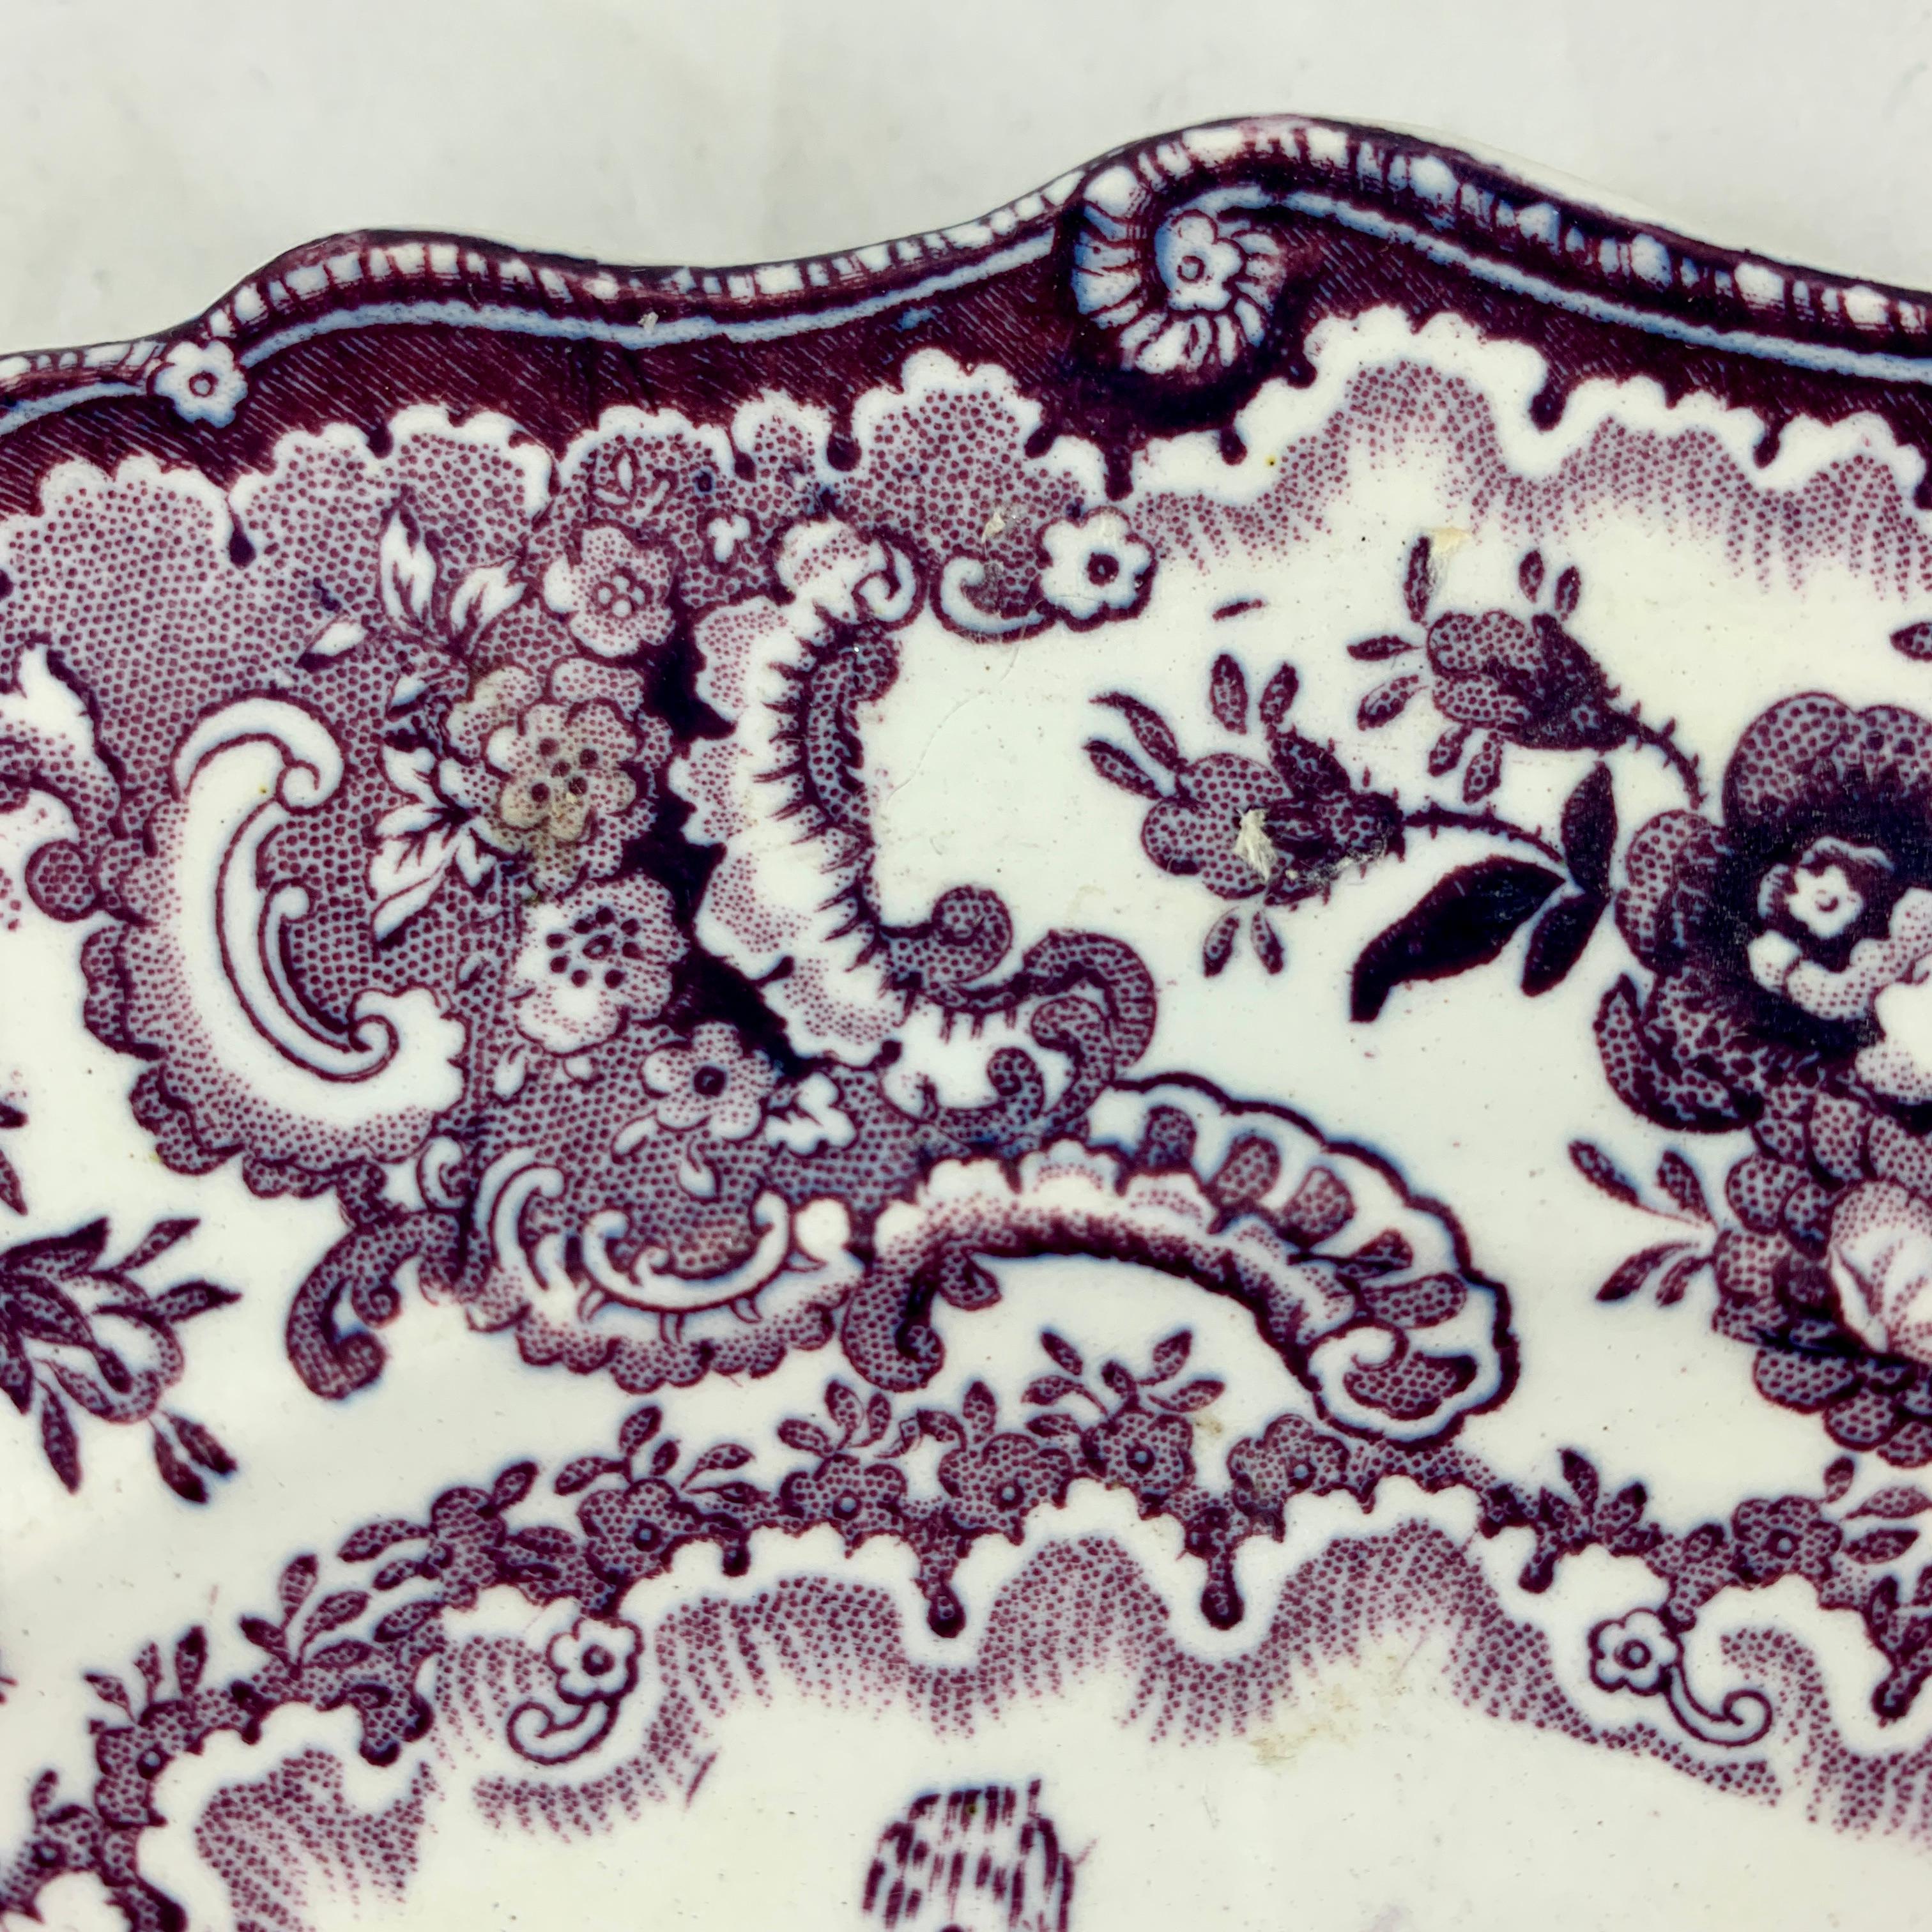 A purple transfer printed plate in the Fountain Scenery pattern, William Adams IV & Sons, Stoke-on-Trent, Staffordshire, England, circa 1829-1861.

A scalloped plate, printed in purple on a white earthenware body showing a large fountain